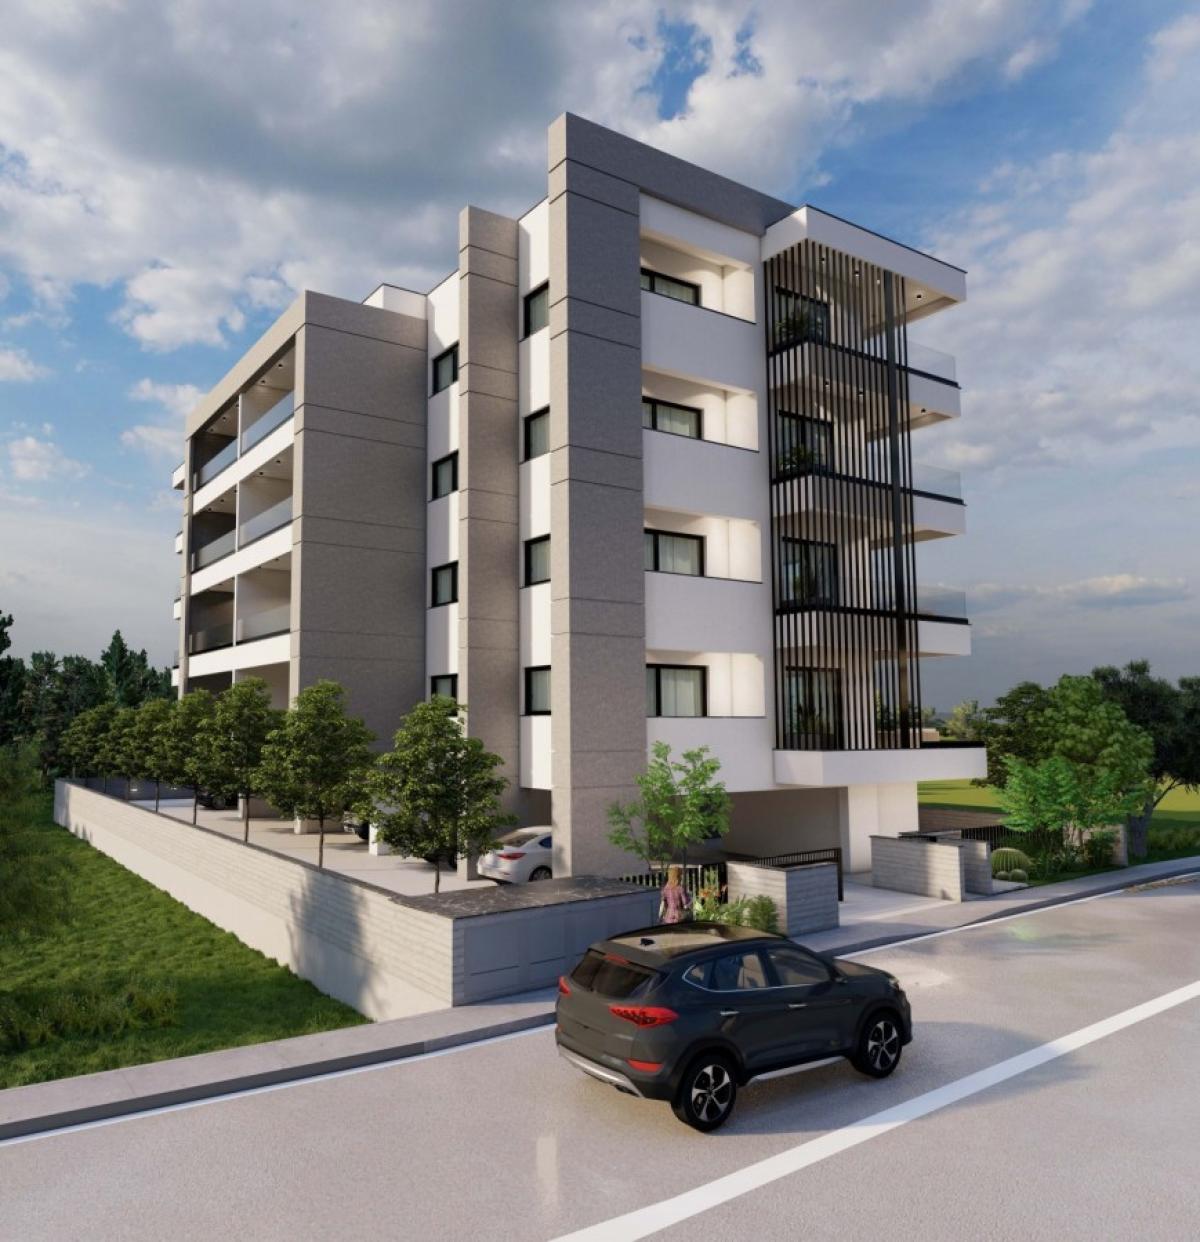 Picture of Condo For Sale in Katholiki, Limassol, Cyprus